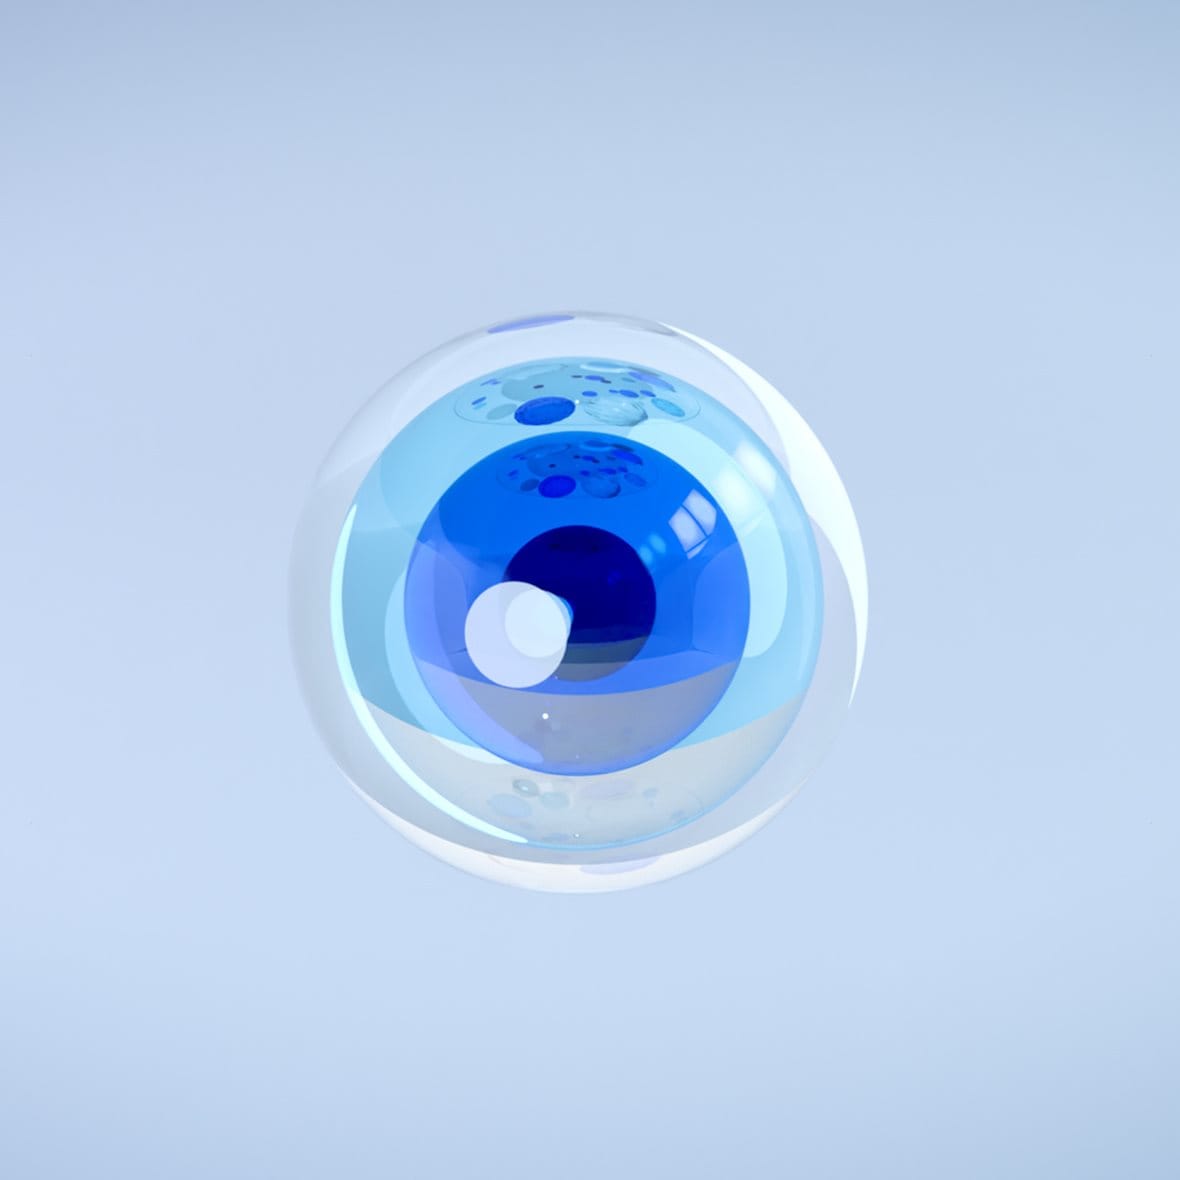 Abstract eye comprising blue and clear glass spheres